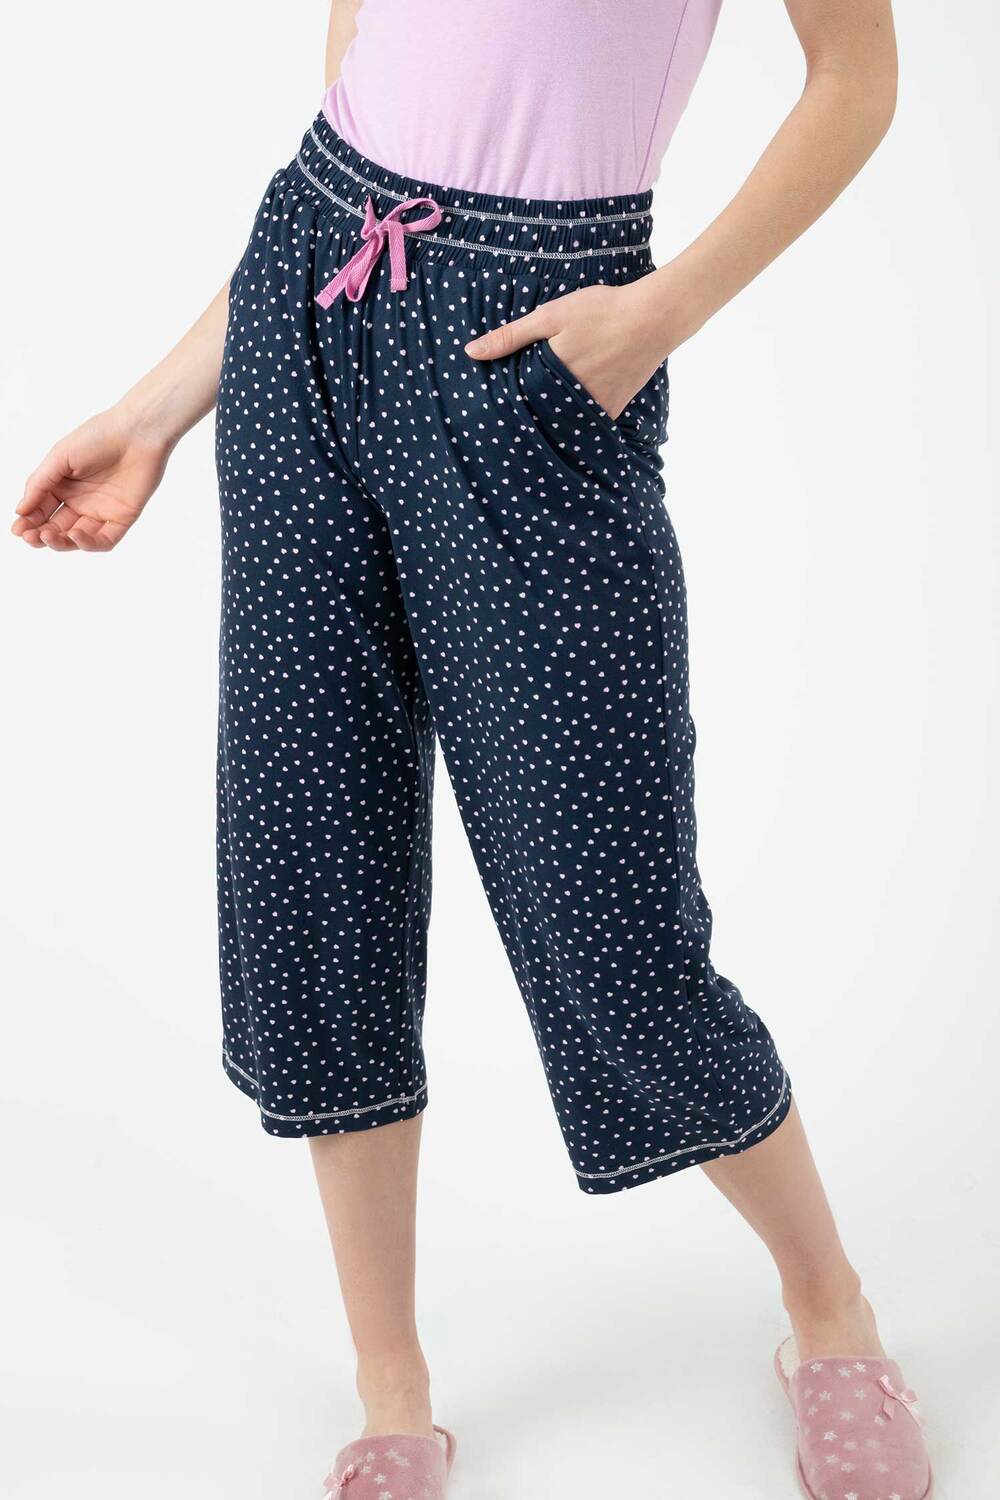 Charmour - Soft touch cropped PJ pants - Weekend vibes